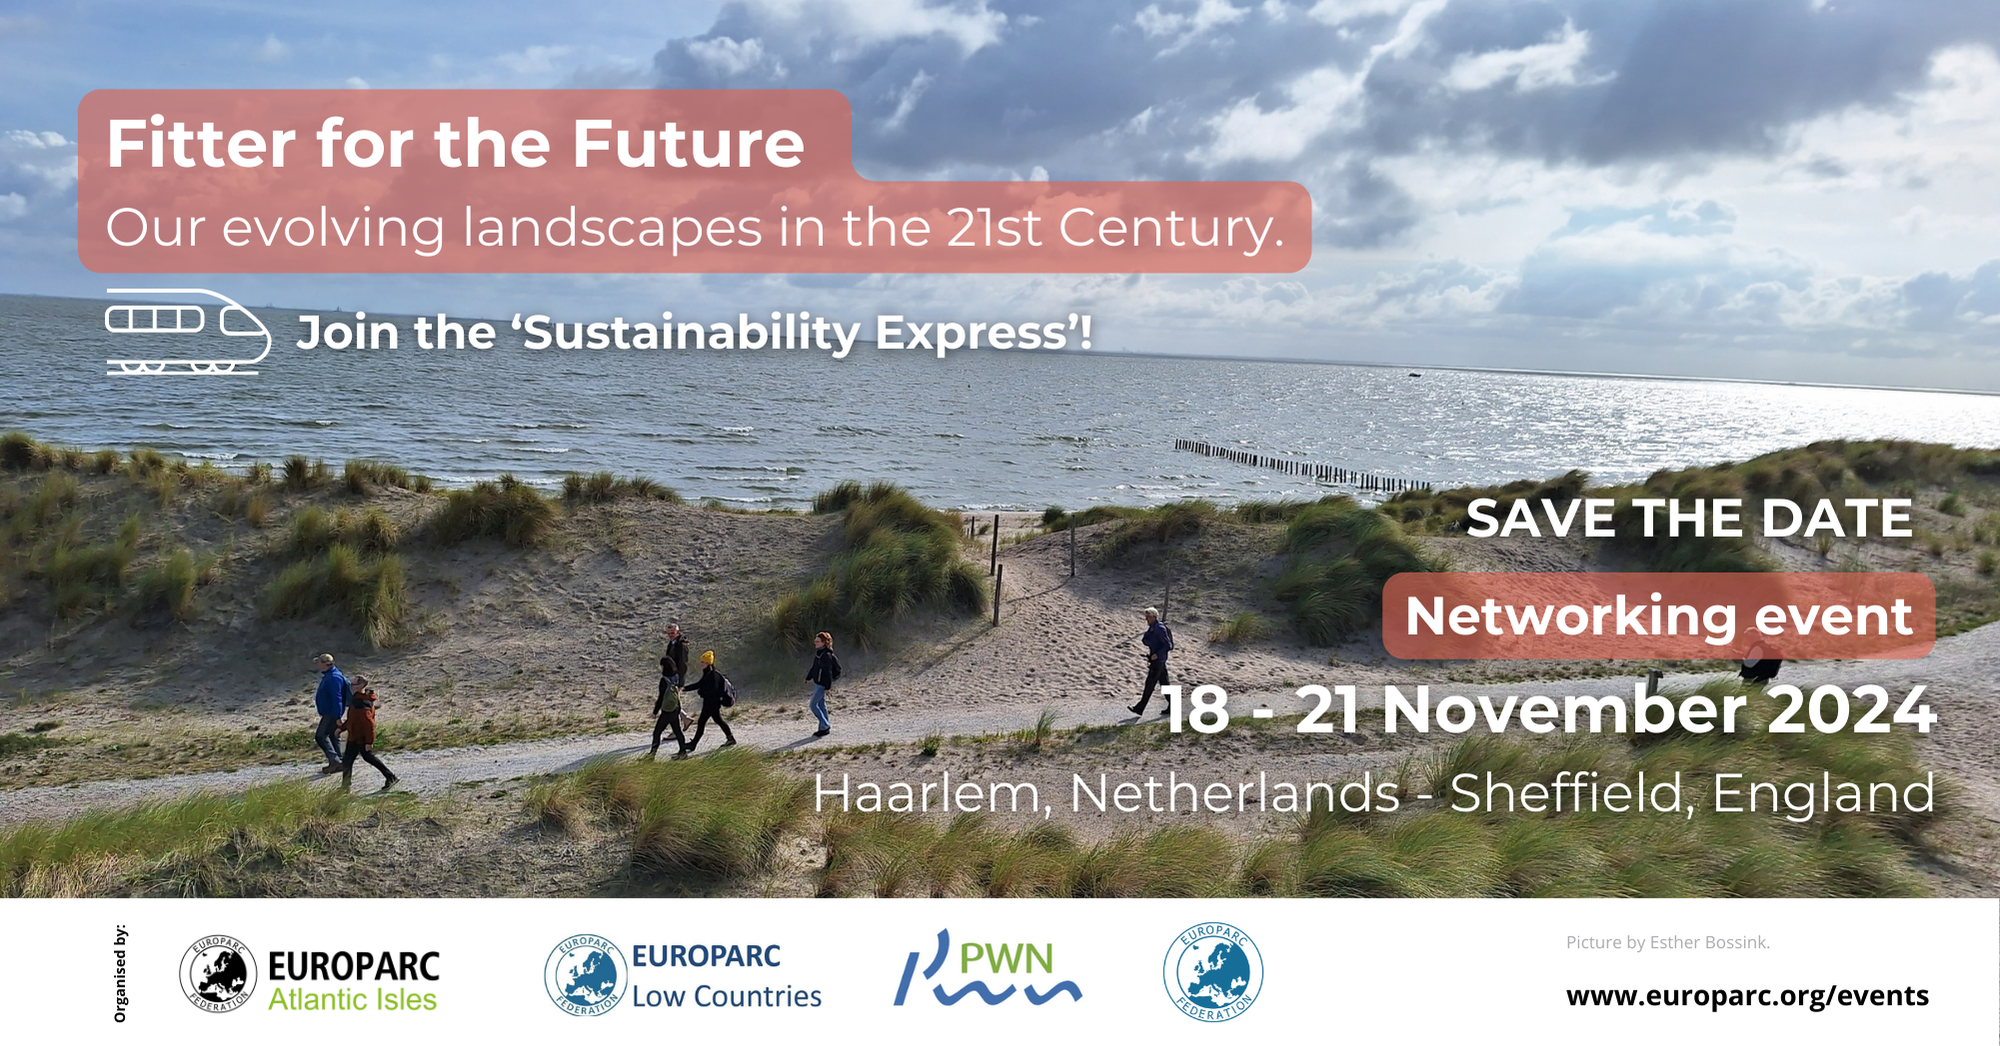 SAVE THE DATE: International Networking event on our future landscapes